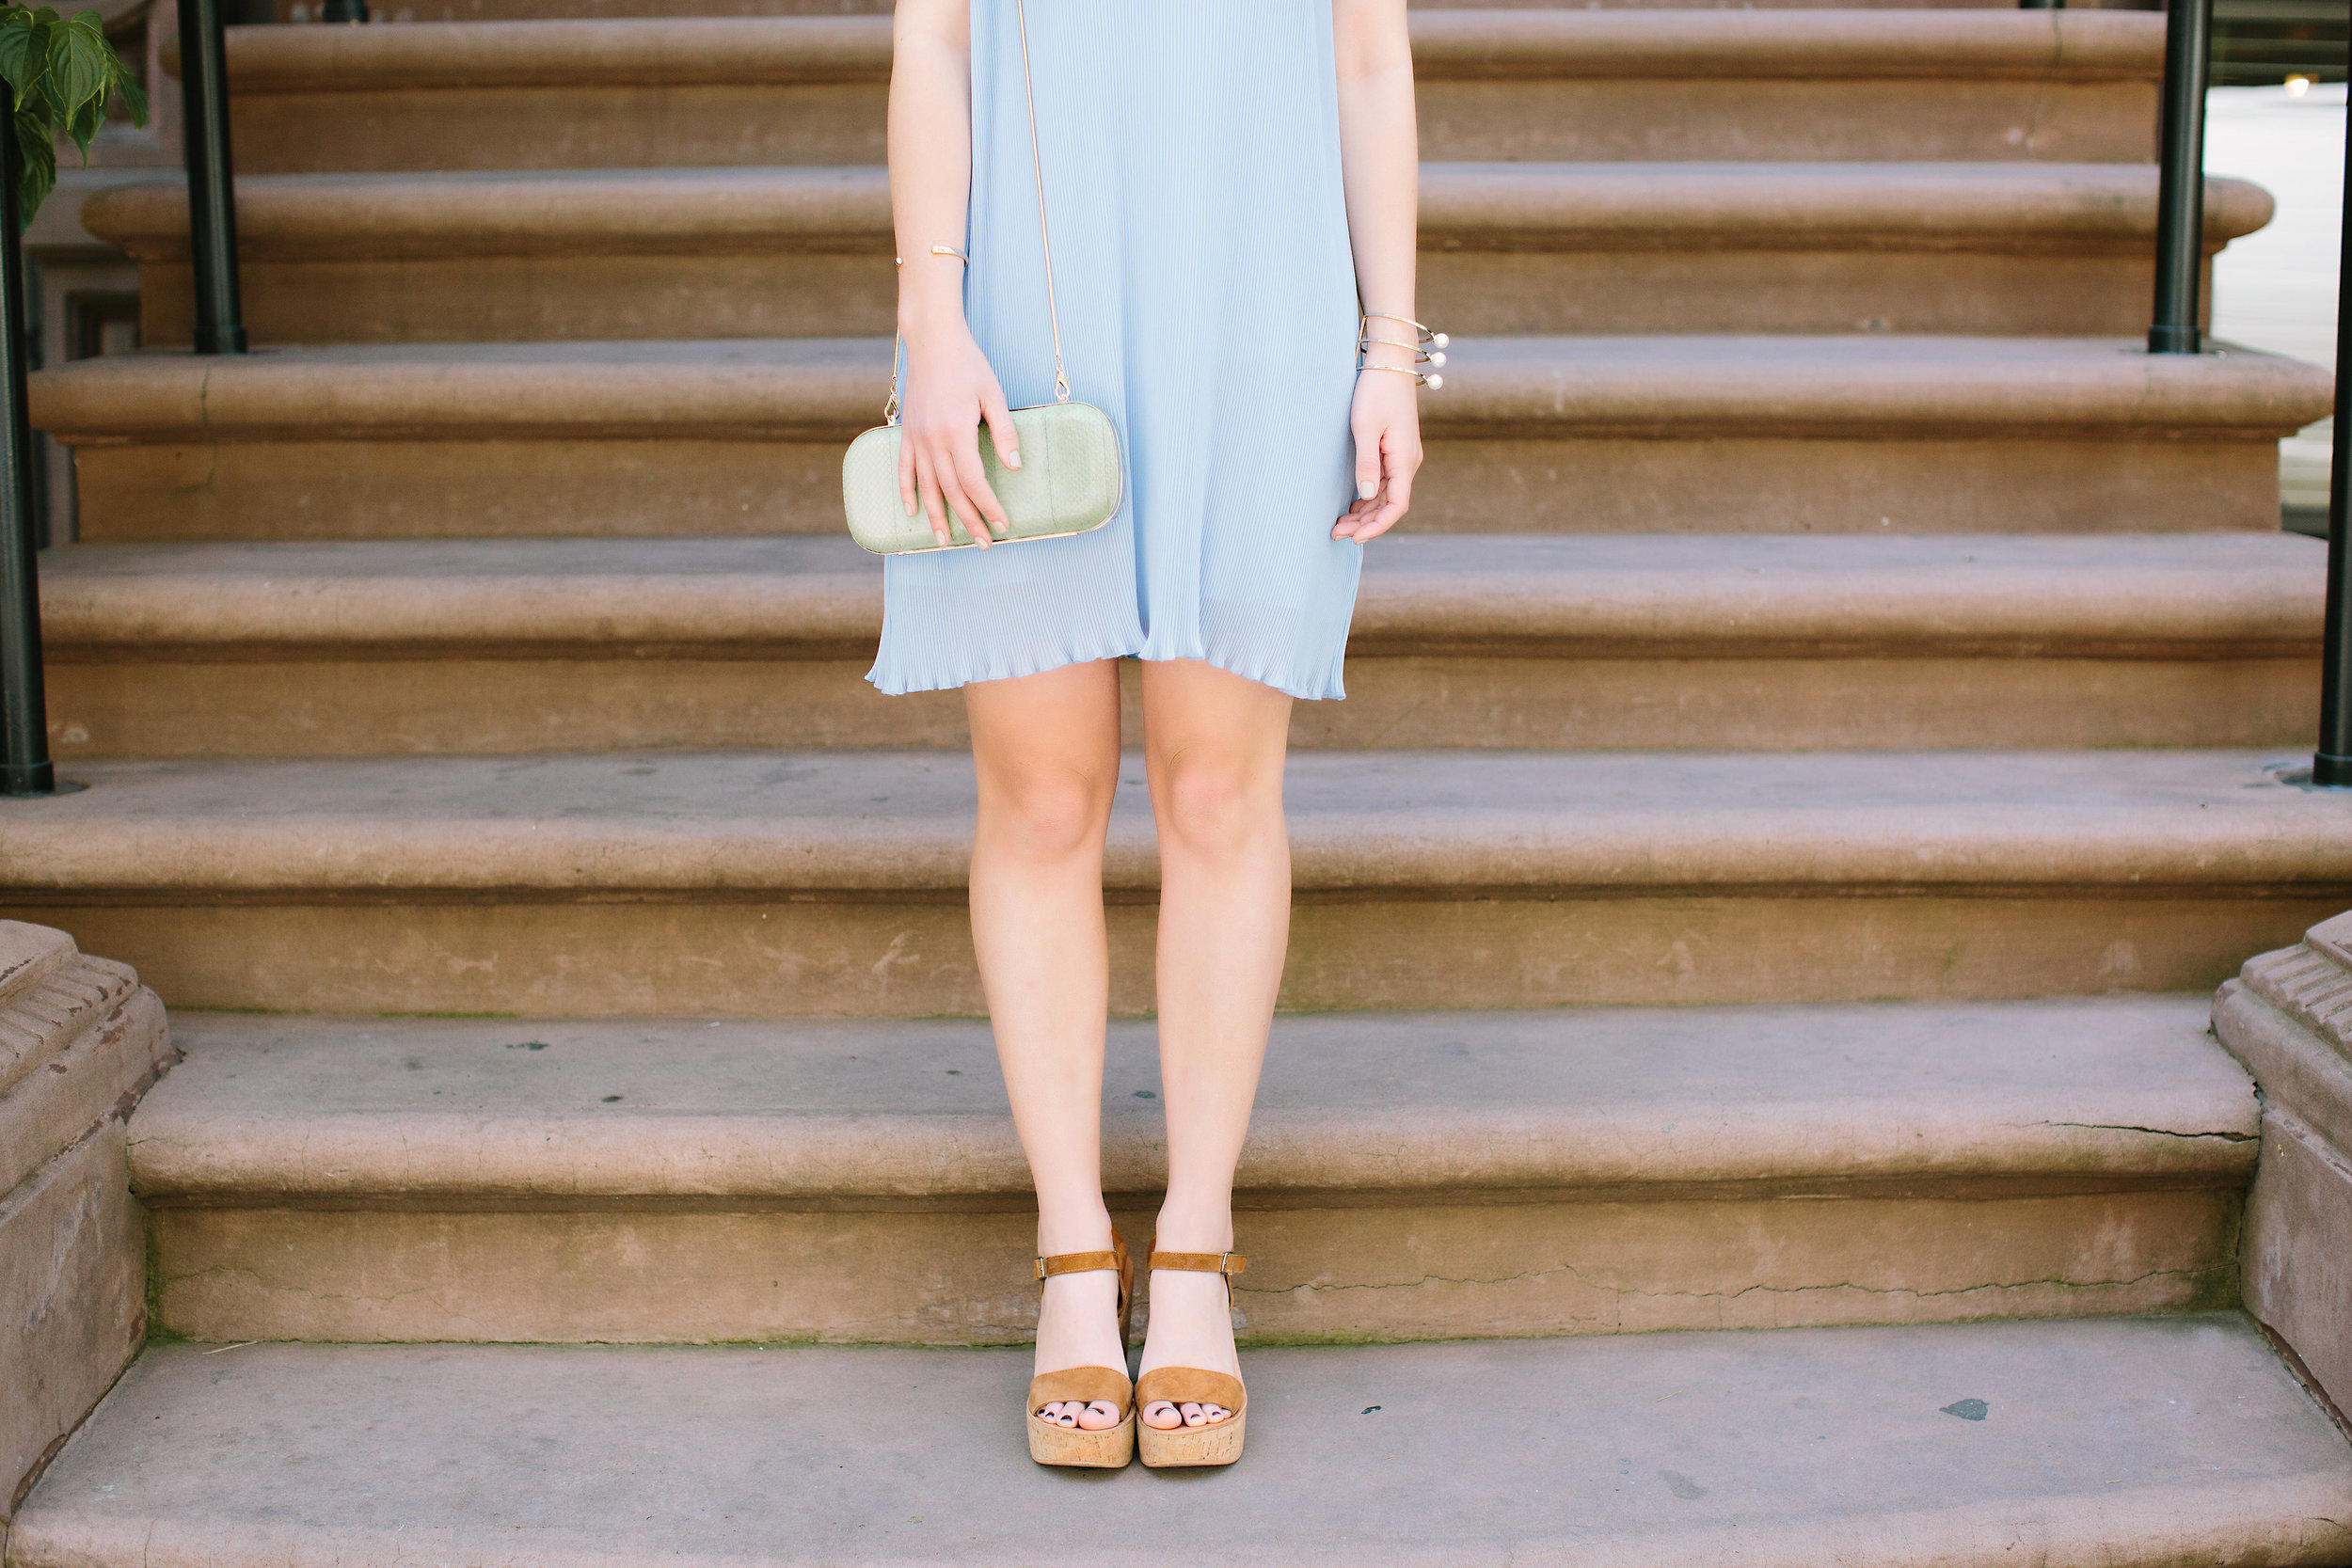 Pastel Blue Pleated Dress Keepsake The Label Louboutins & Love Fashion Blog Esther Santer NYC Street Style Blogger Outfit OOTD Pretty Photoshoot Upper East Side Dolce Vita Wedges Gold Jewelry Clutch Club Monaco Women White Tee Shirt Inspo Summer Look.jpg